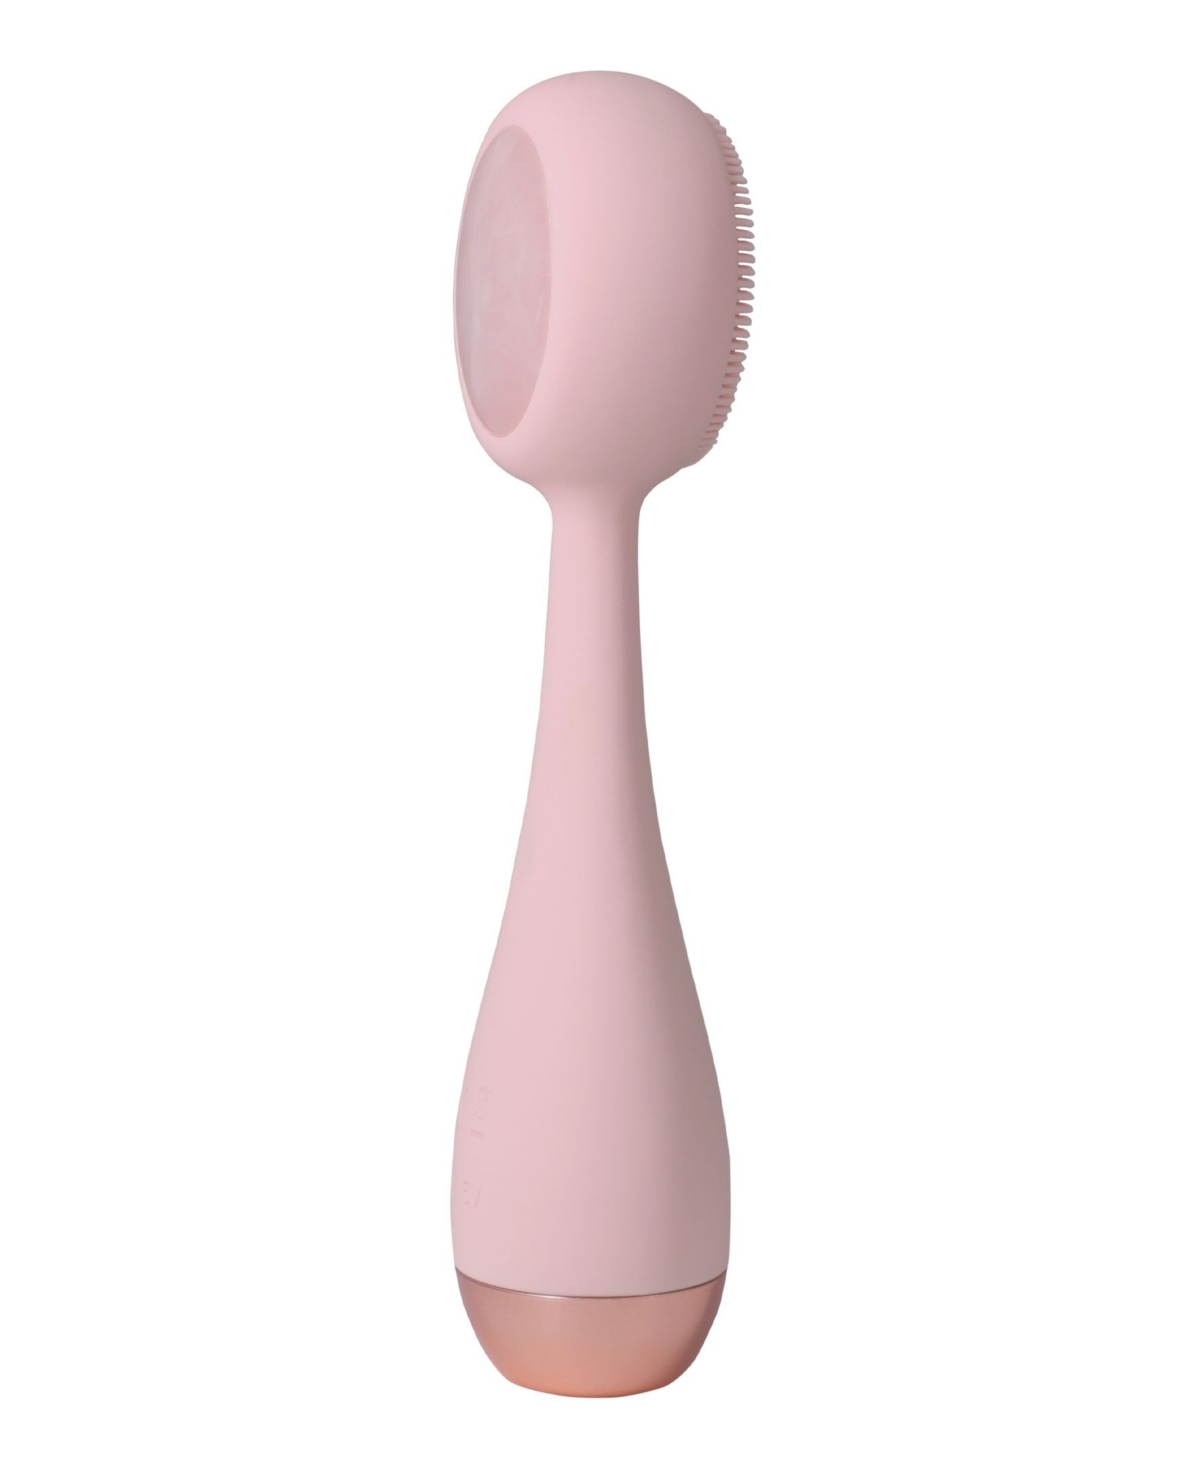 Pmd Clean Pro Rose Quartz- Facial Cleansing Device In Blush With Rose Gold Finish